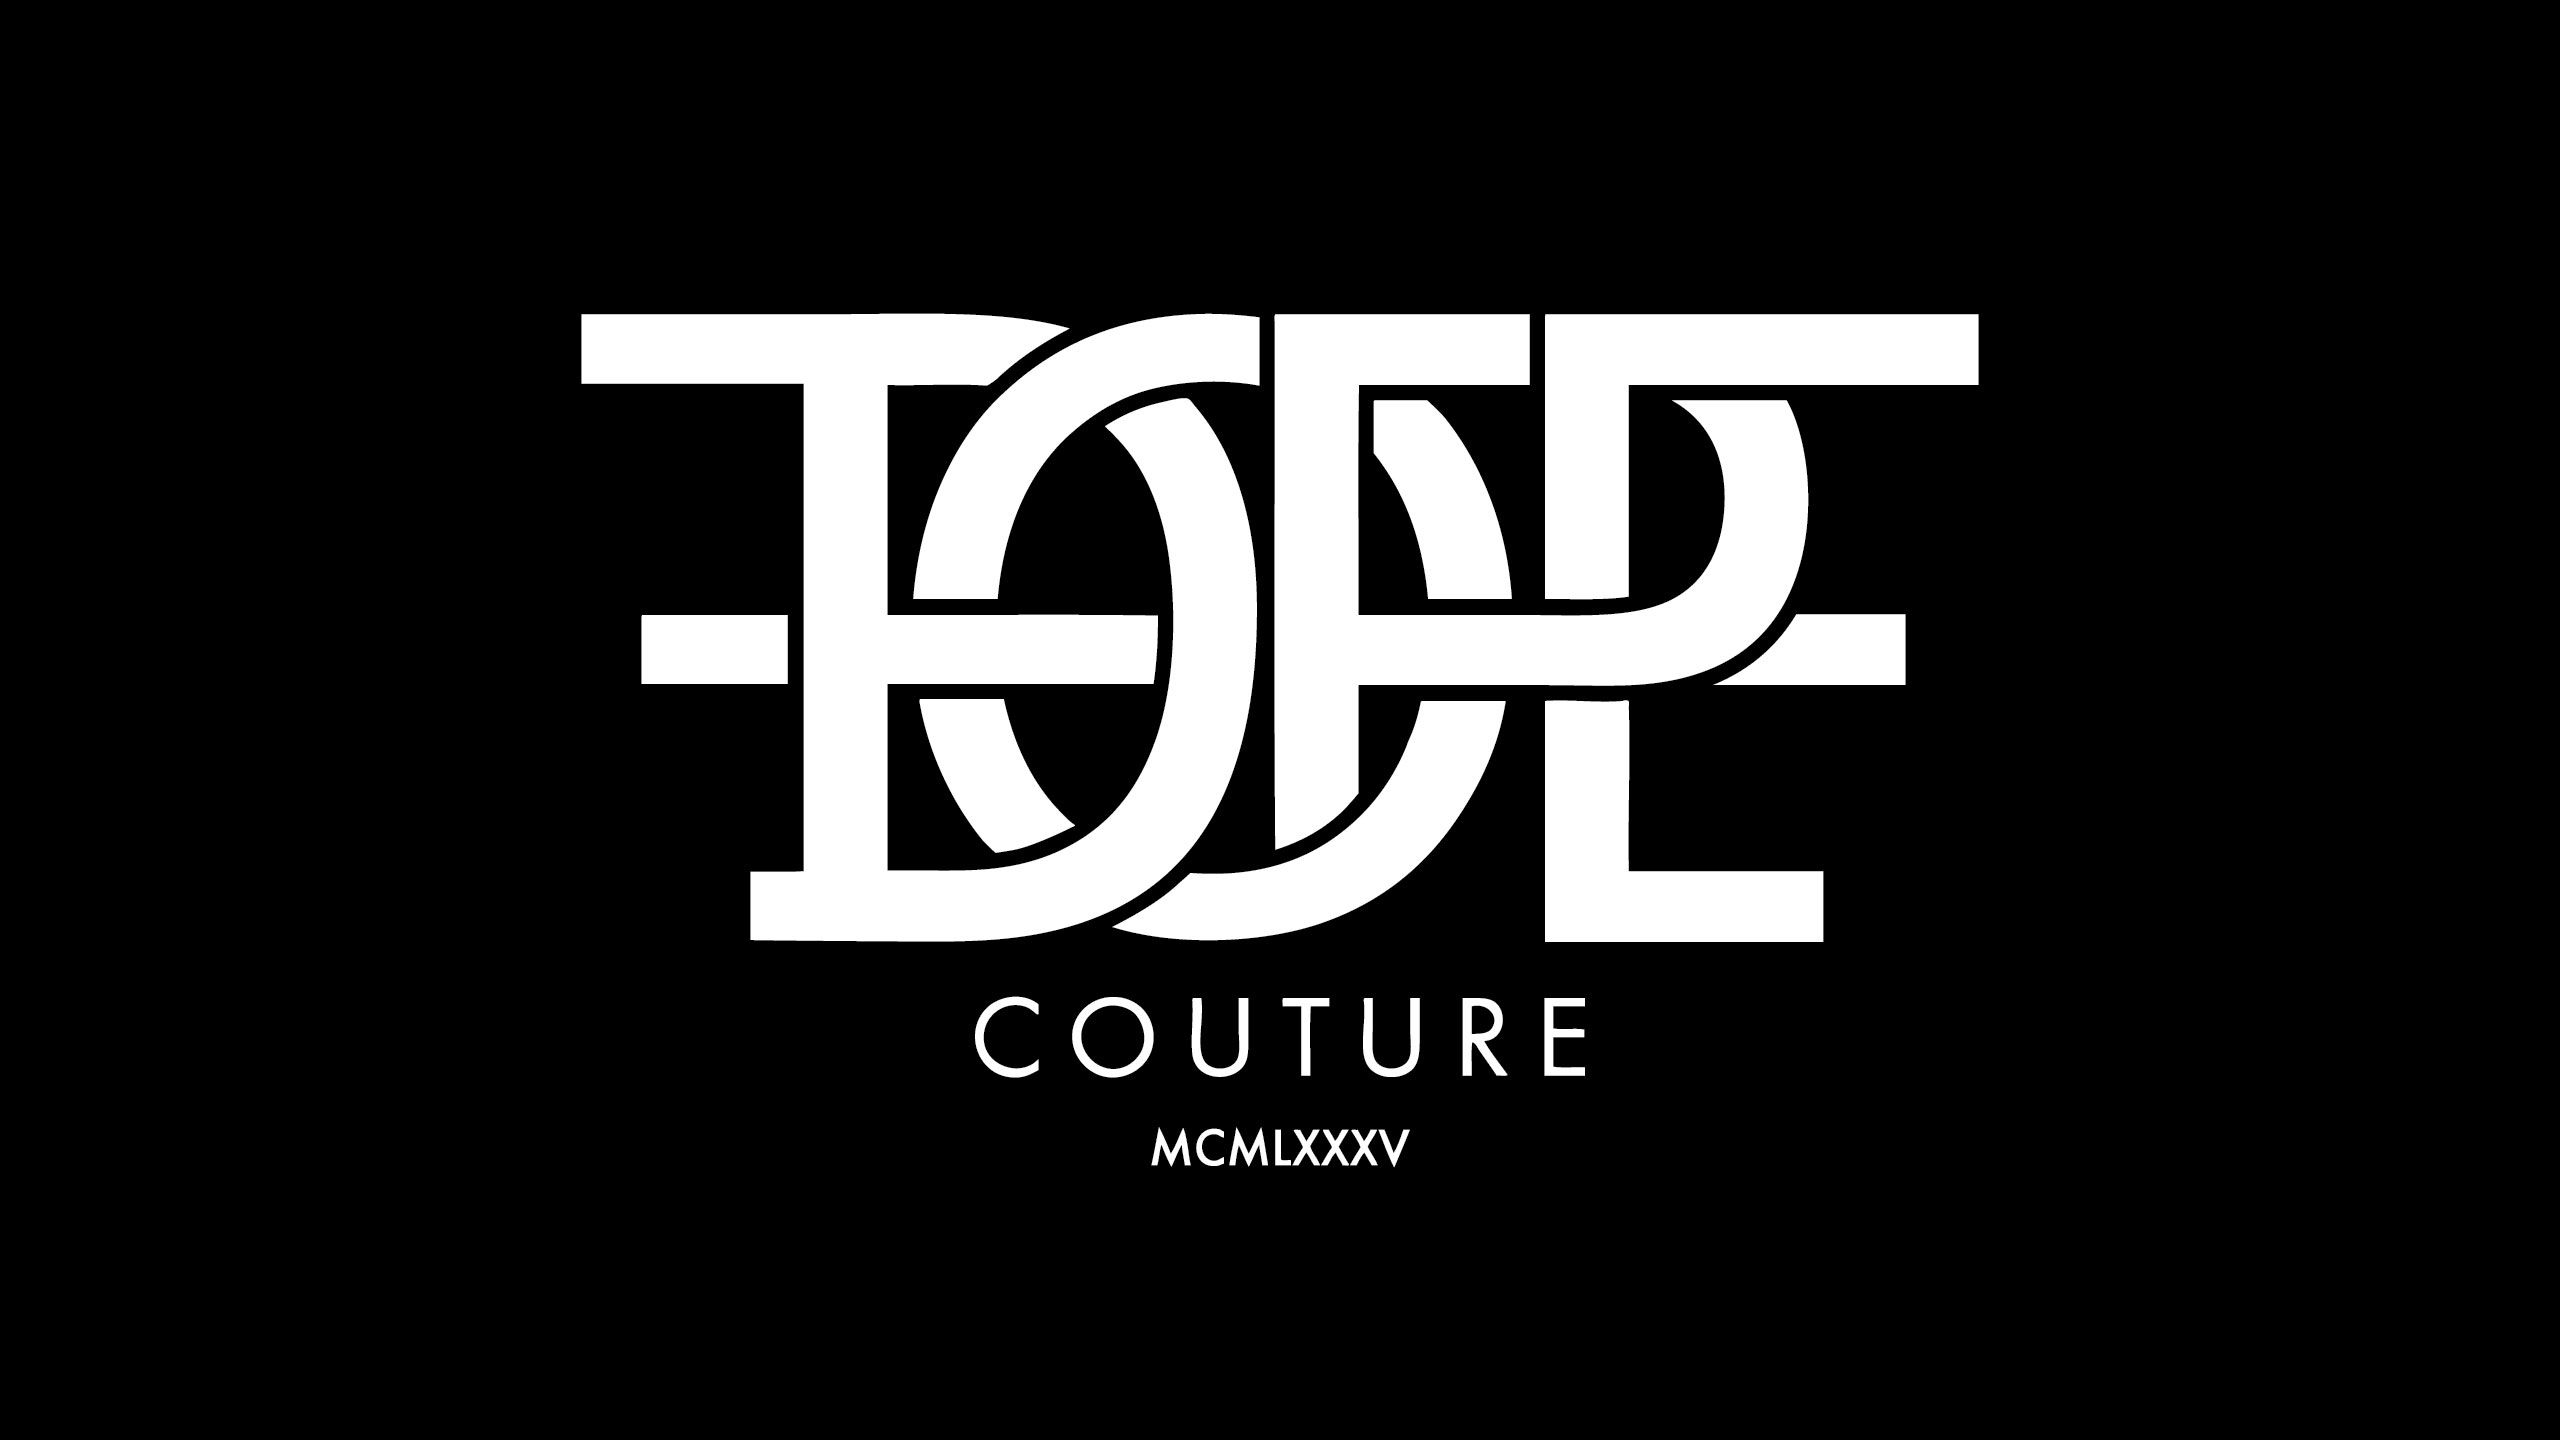 Dope couture wallpaper